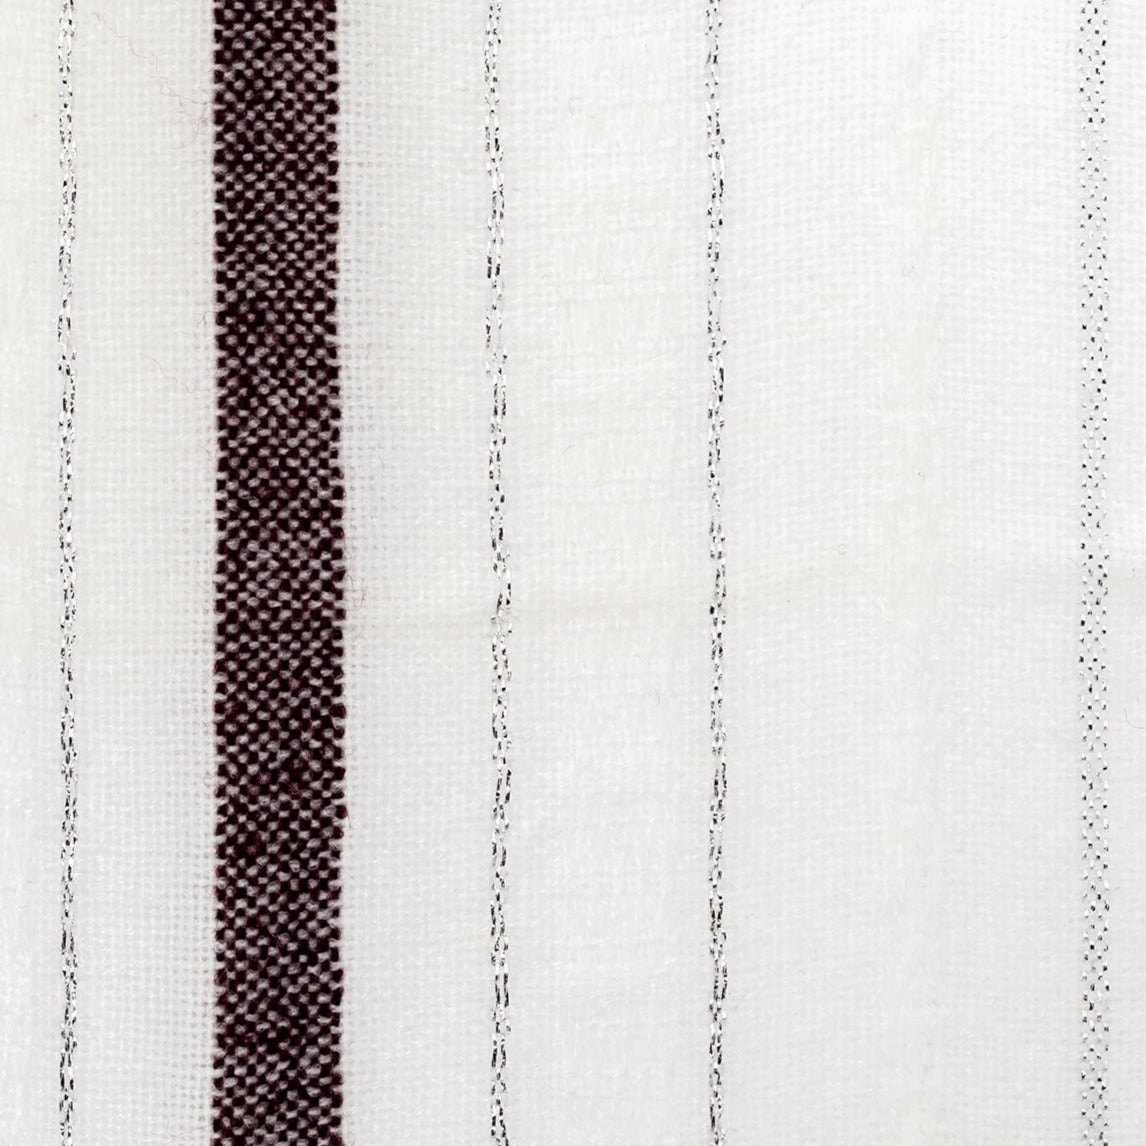 Tablecloths - Minimal Design - Bordeaux and Silver on White